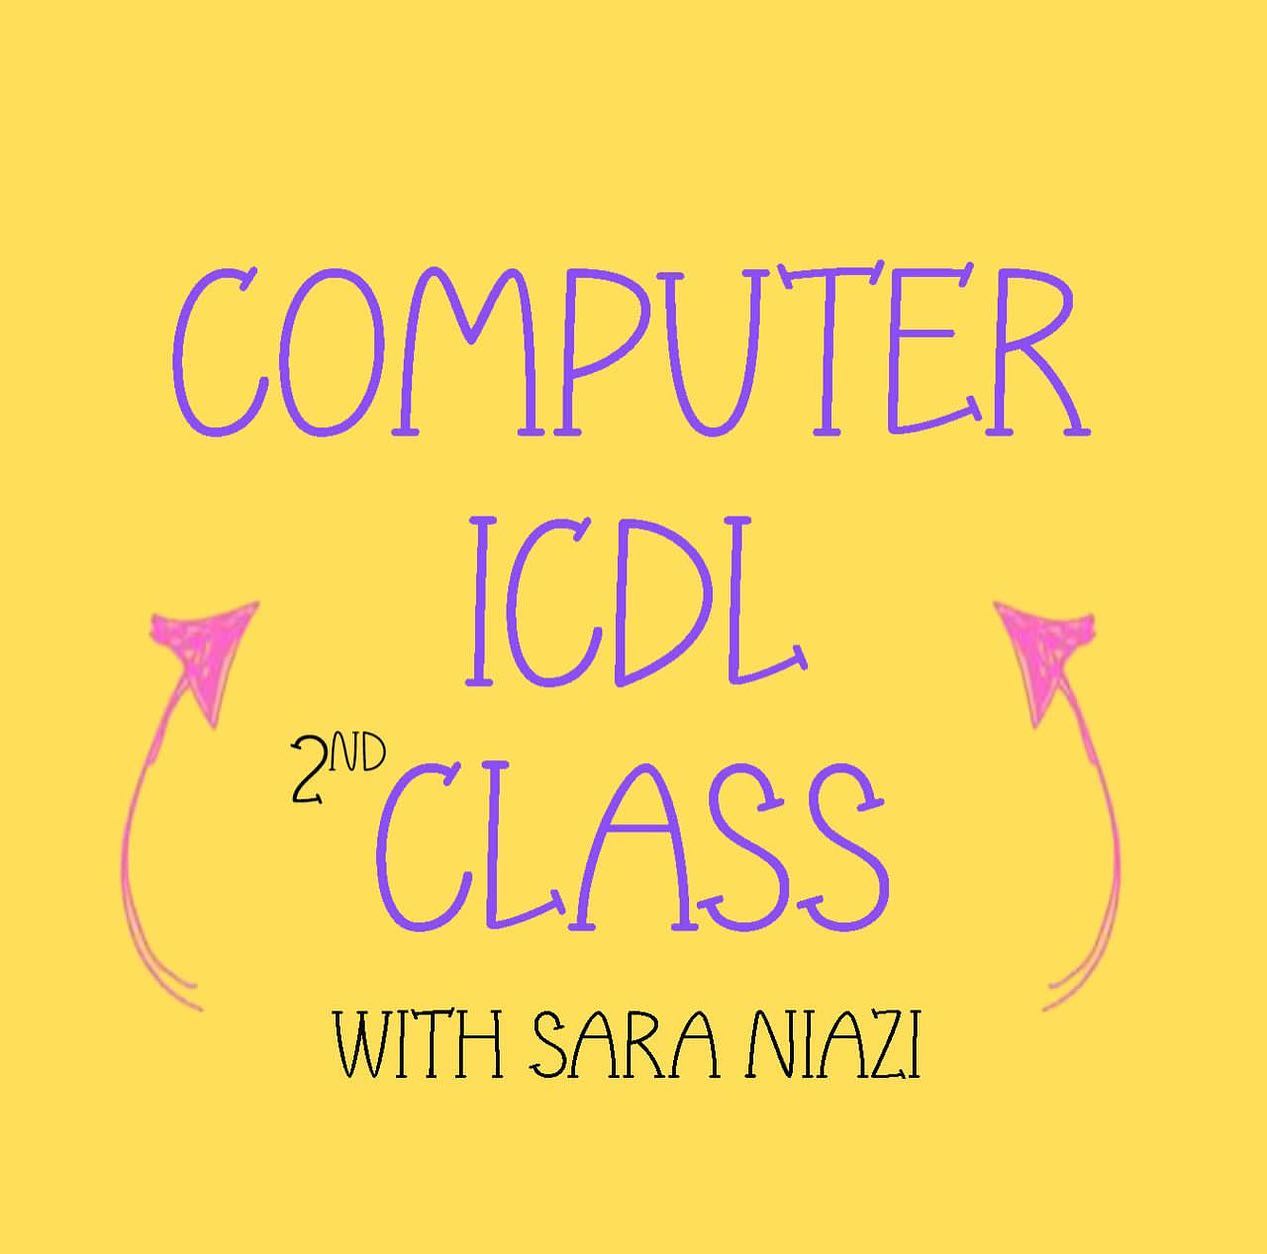 sharepic for second computer ICDL course